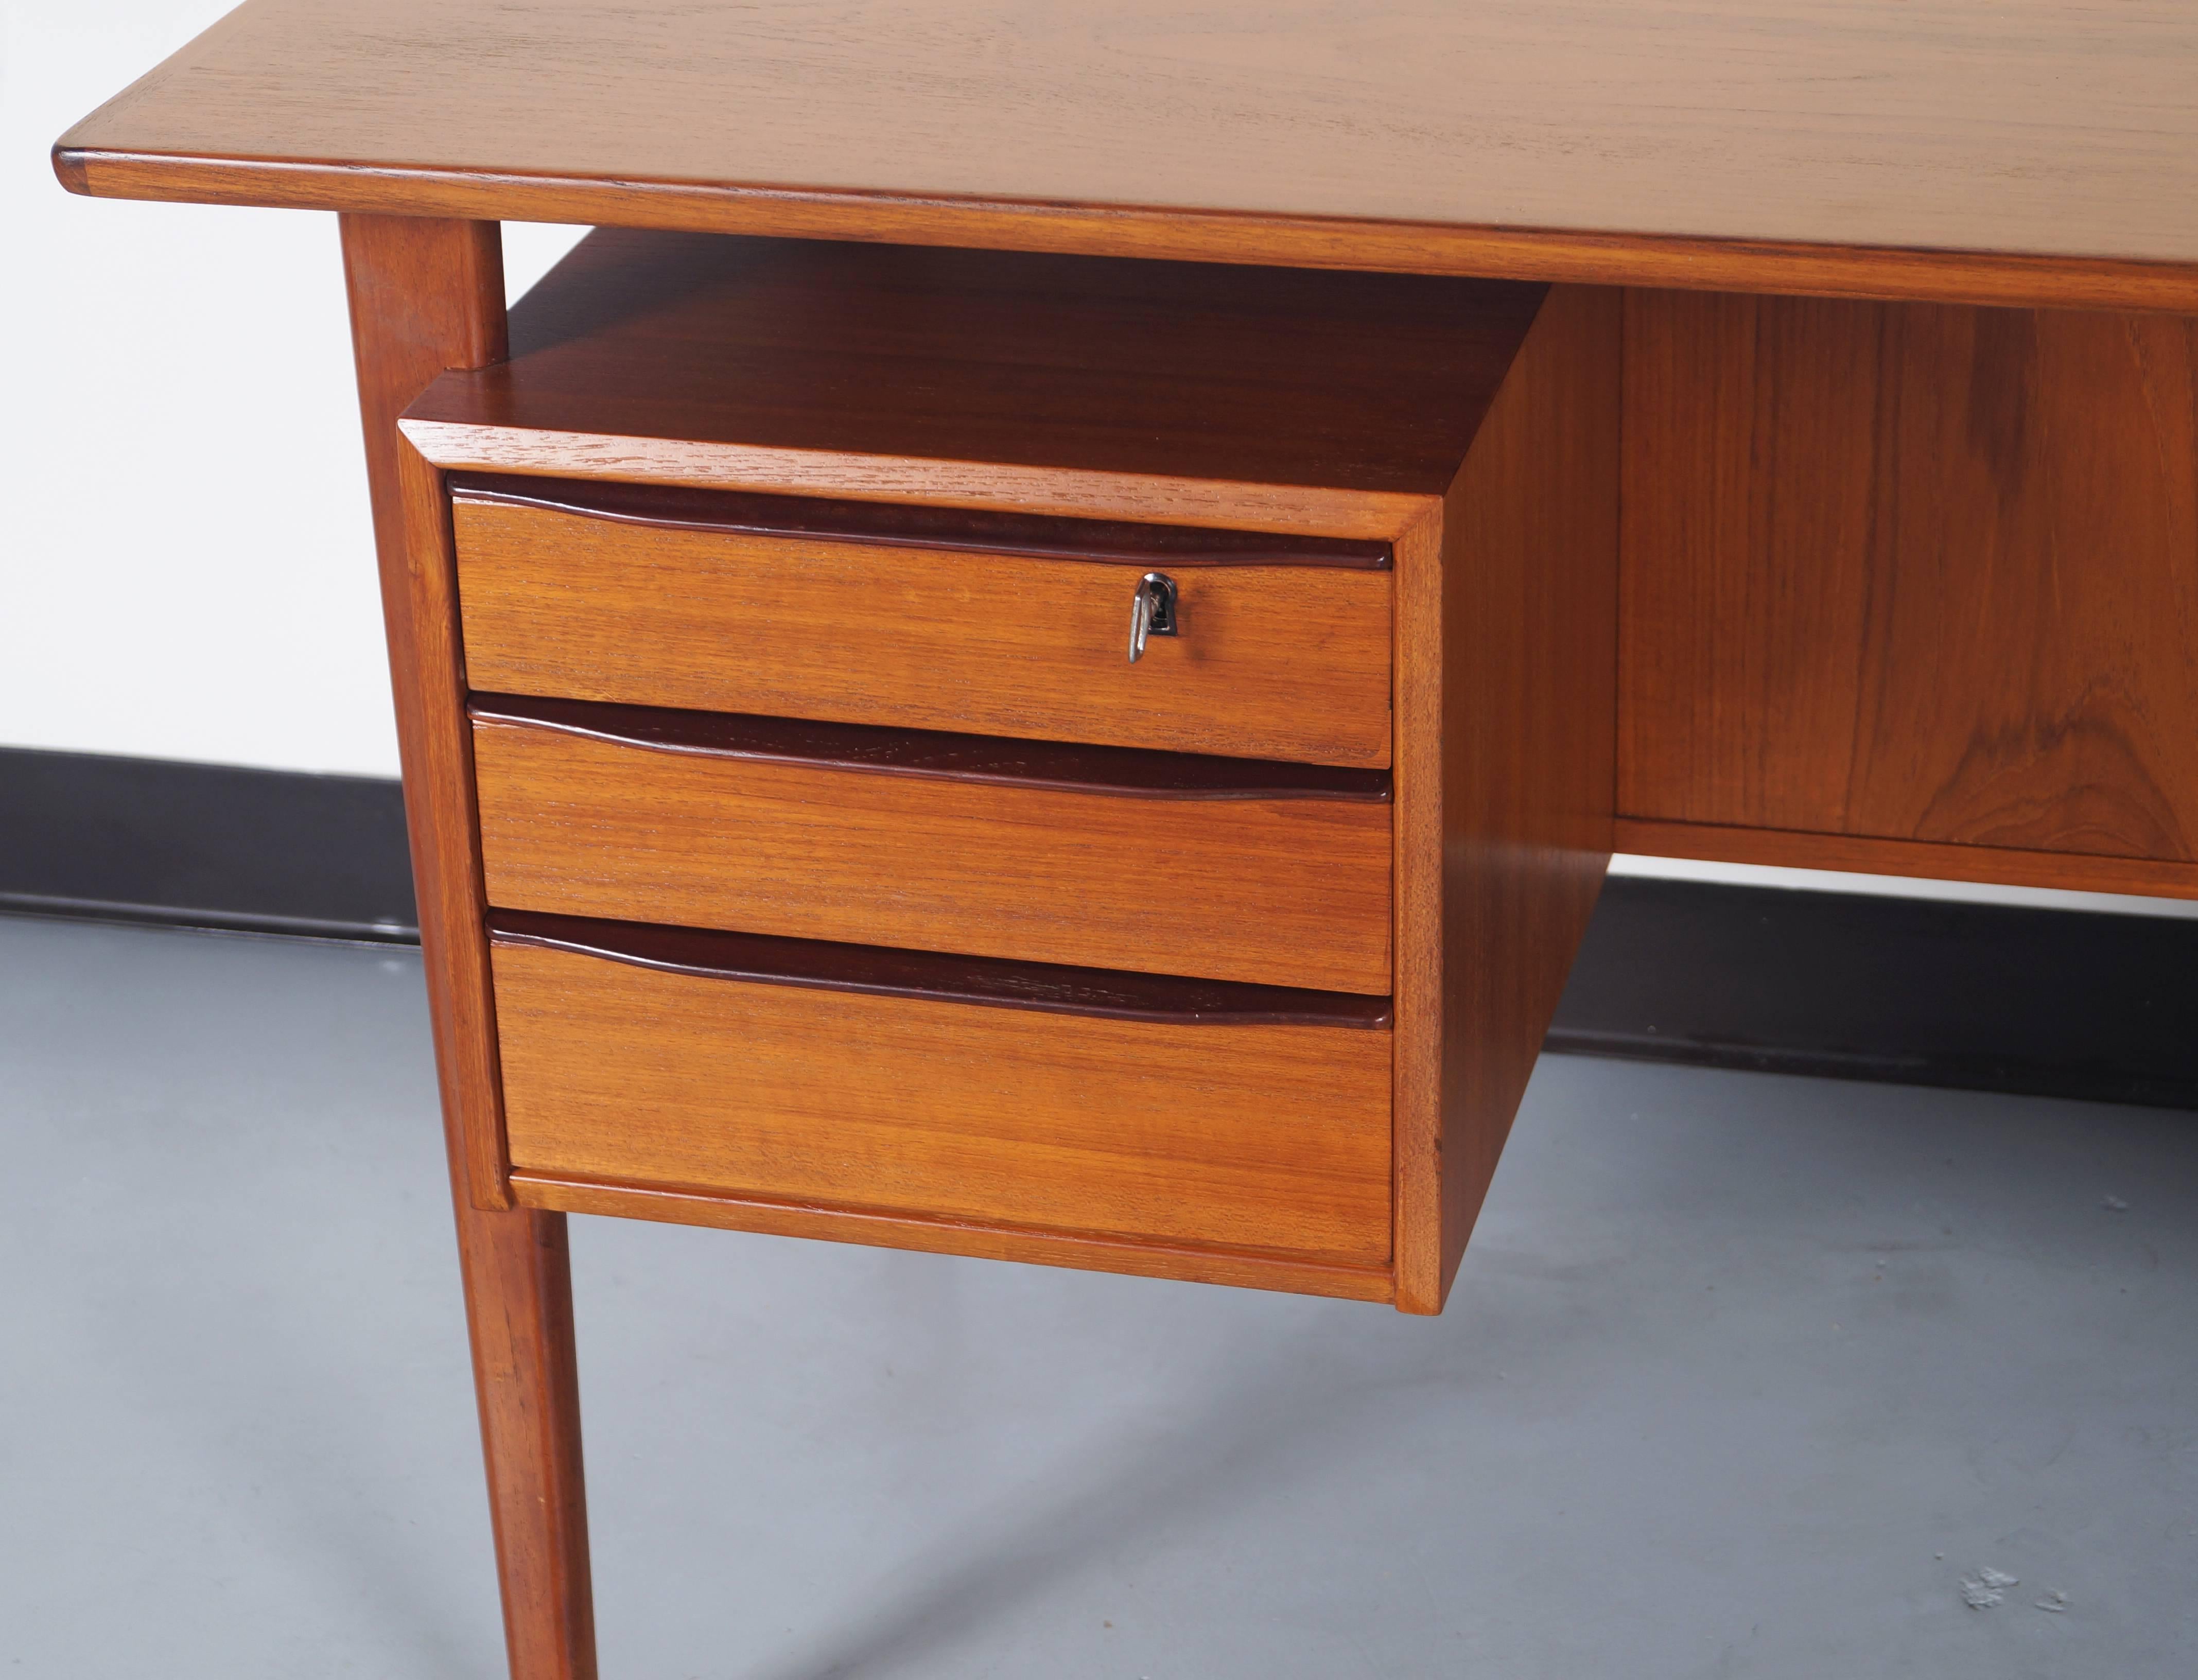 Stunning Danish Modern desk designed by Peter Lovig Nielsen for Dansk Design. Sculptural floating top, raised lips and integrated bookshelves on the back side. Contains four drawers total with a large file drawer. Key included.